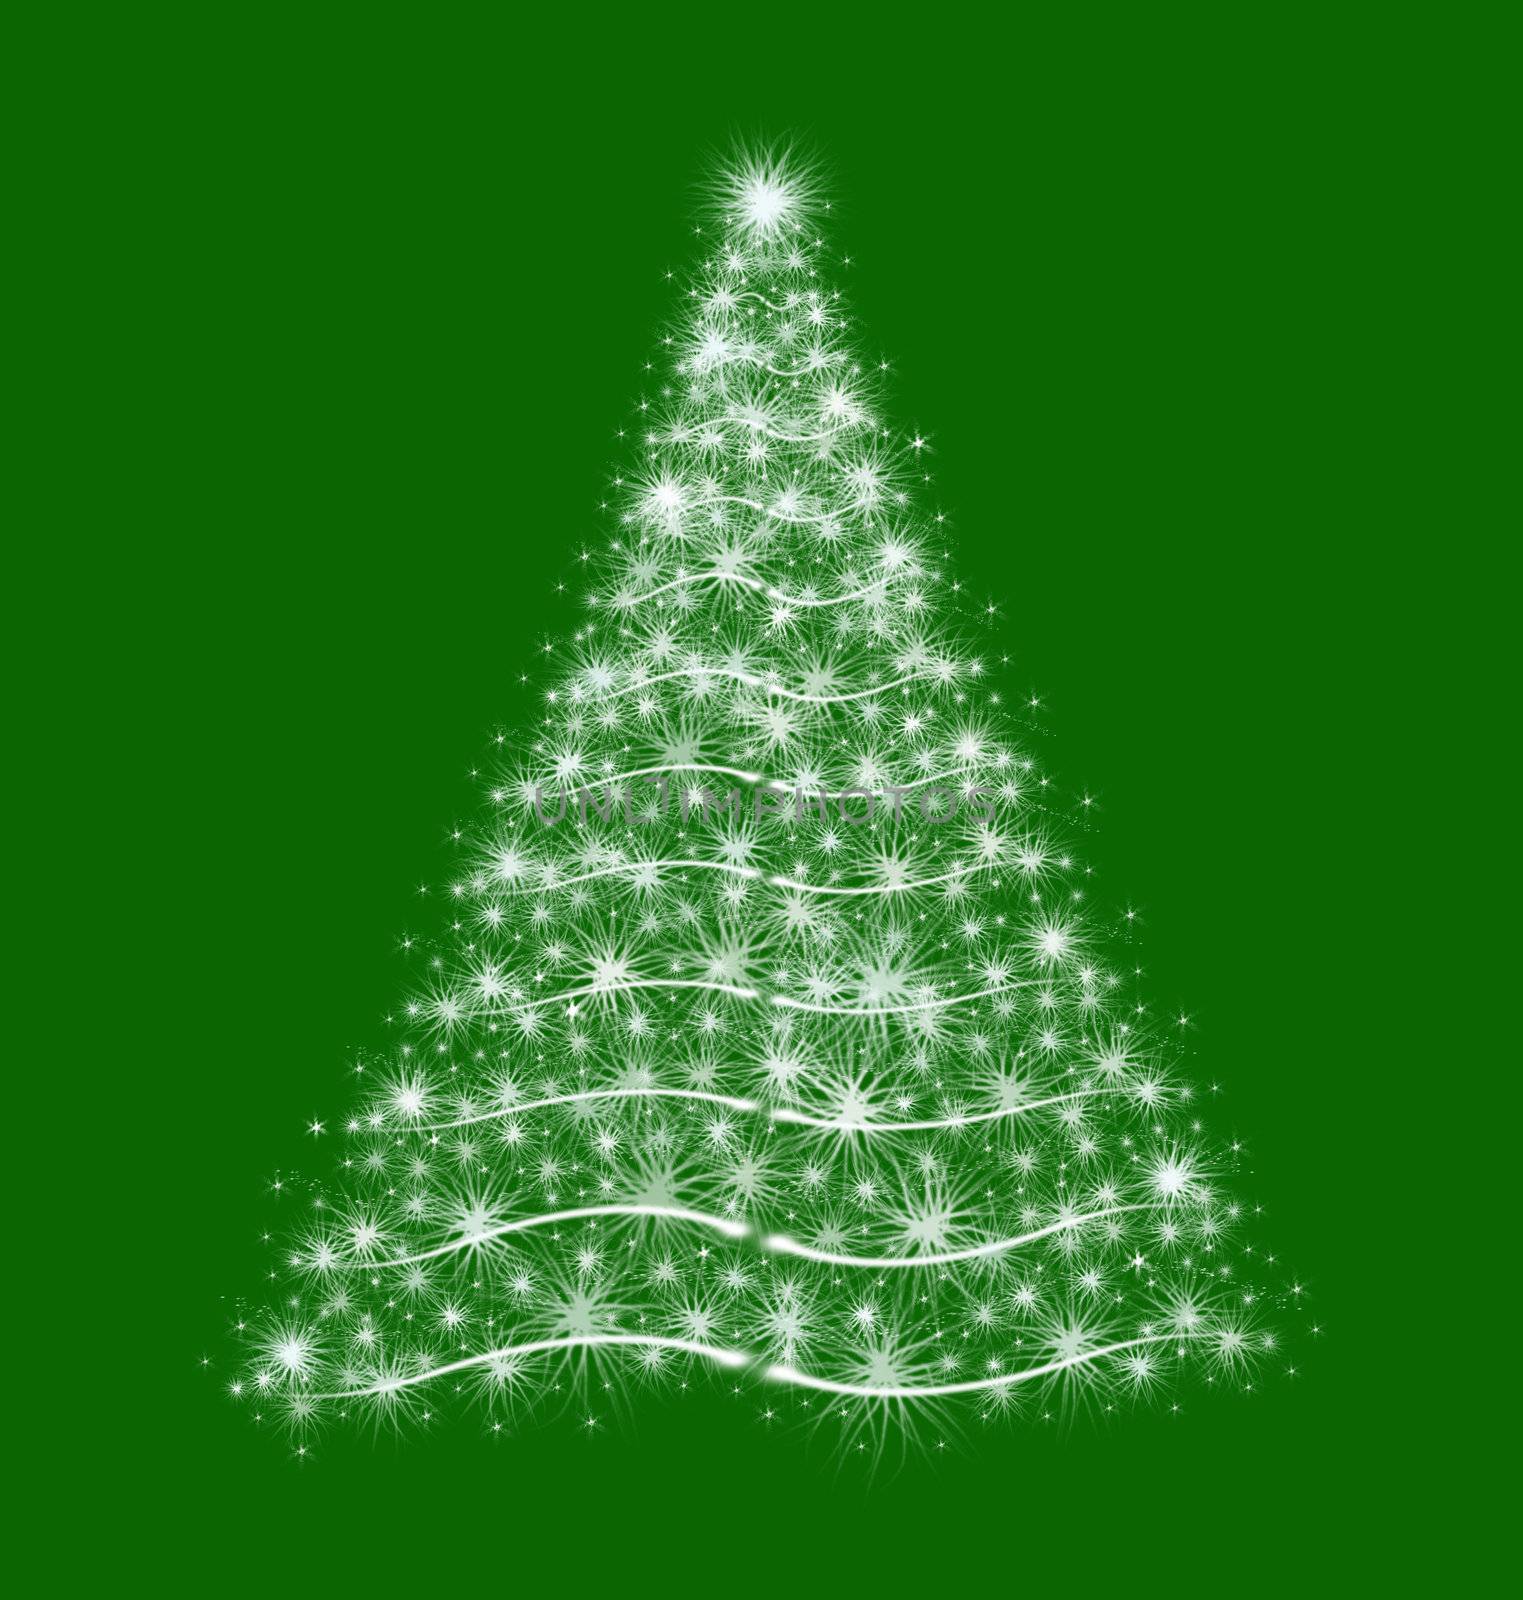 christmas tree drawn by white lights over green background 
